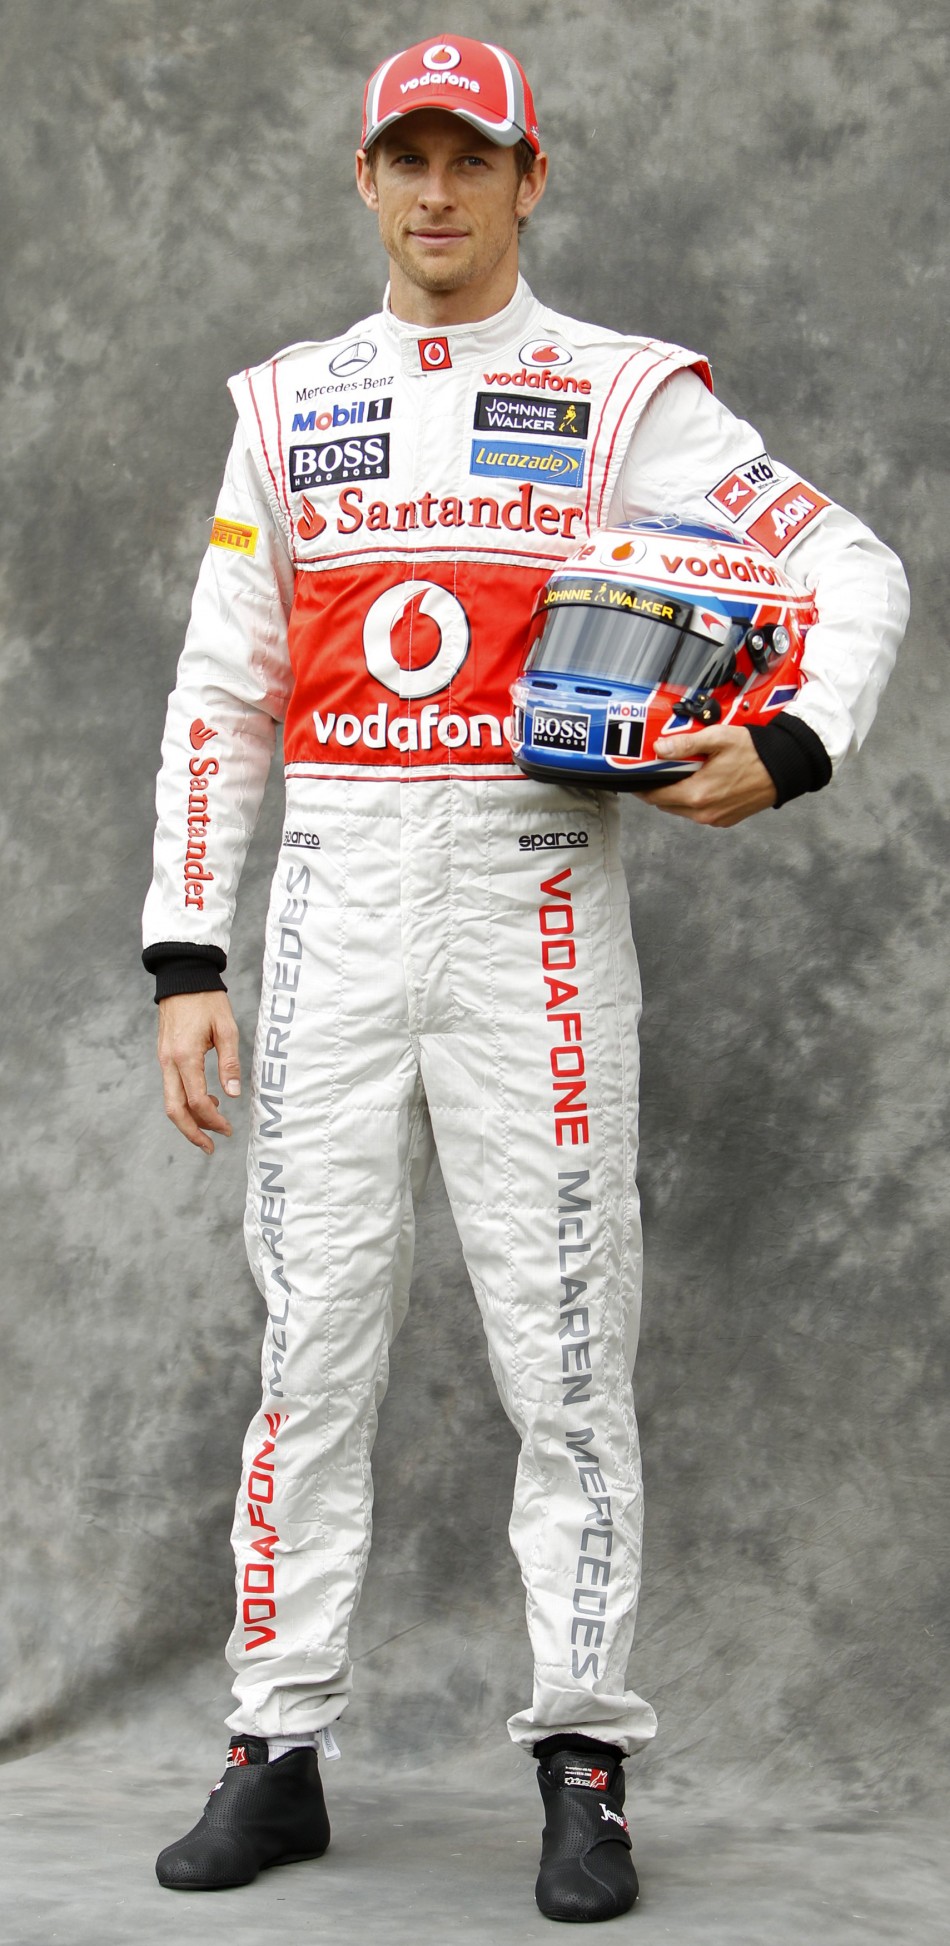 McLaren Formula One driver Button poses prior to the Australian F1 Grand Prix at the Albert Park circuit in Melbourne